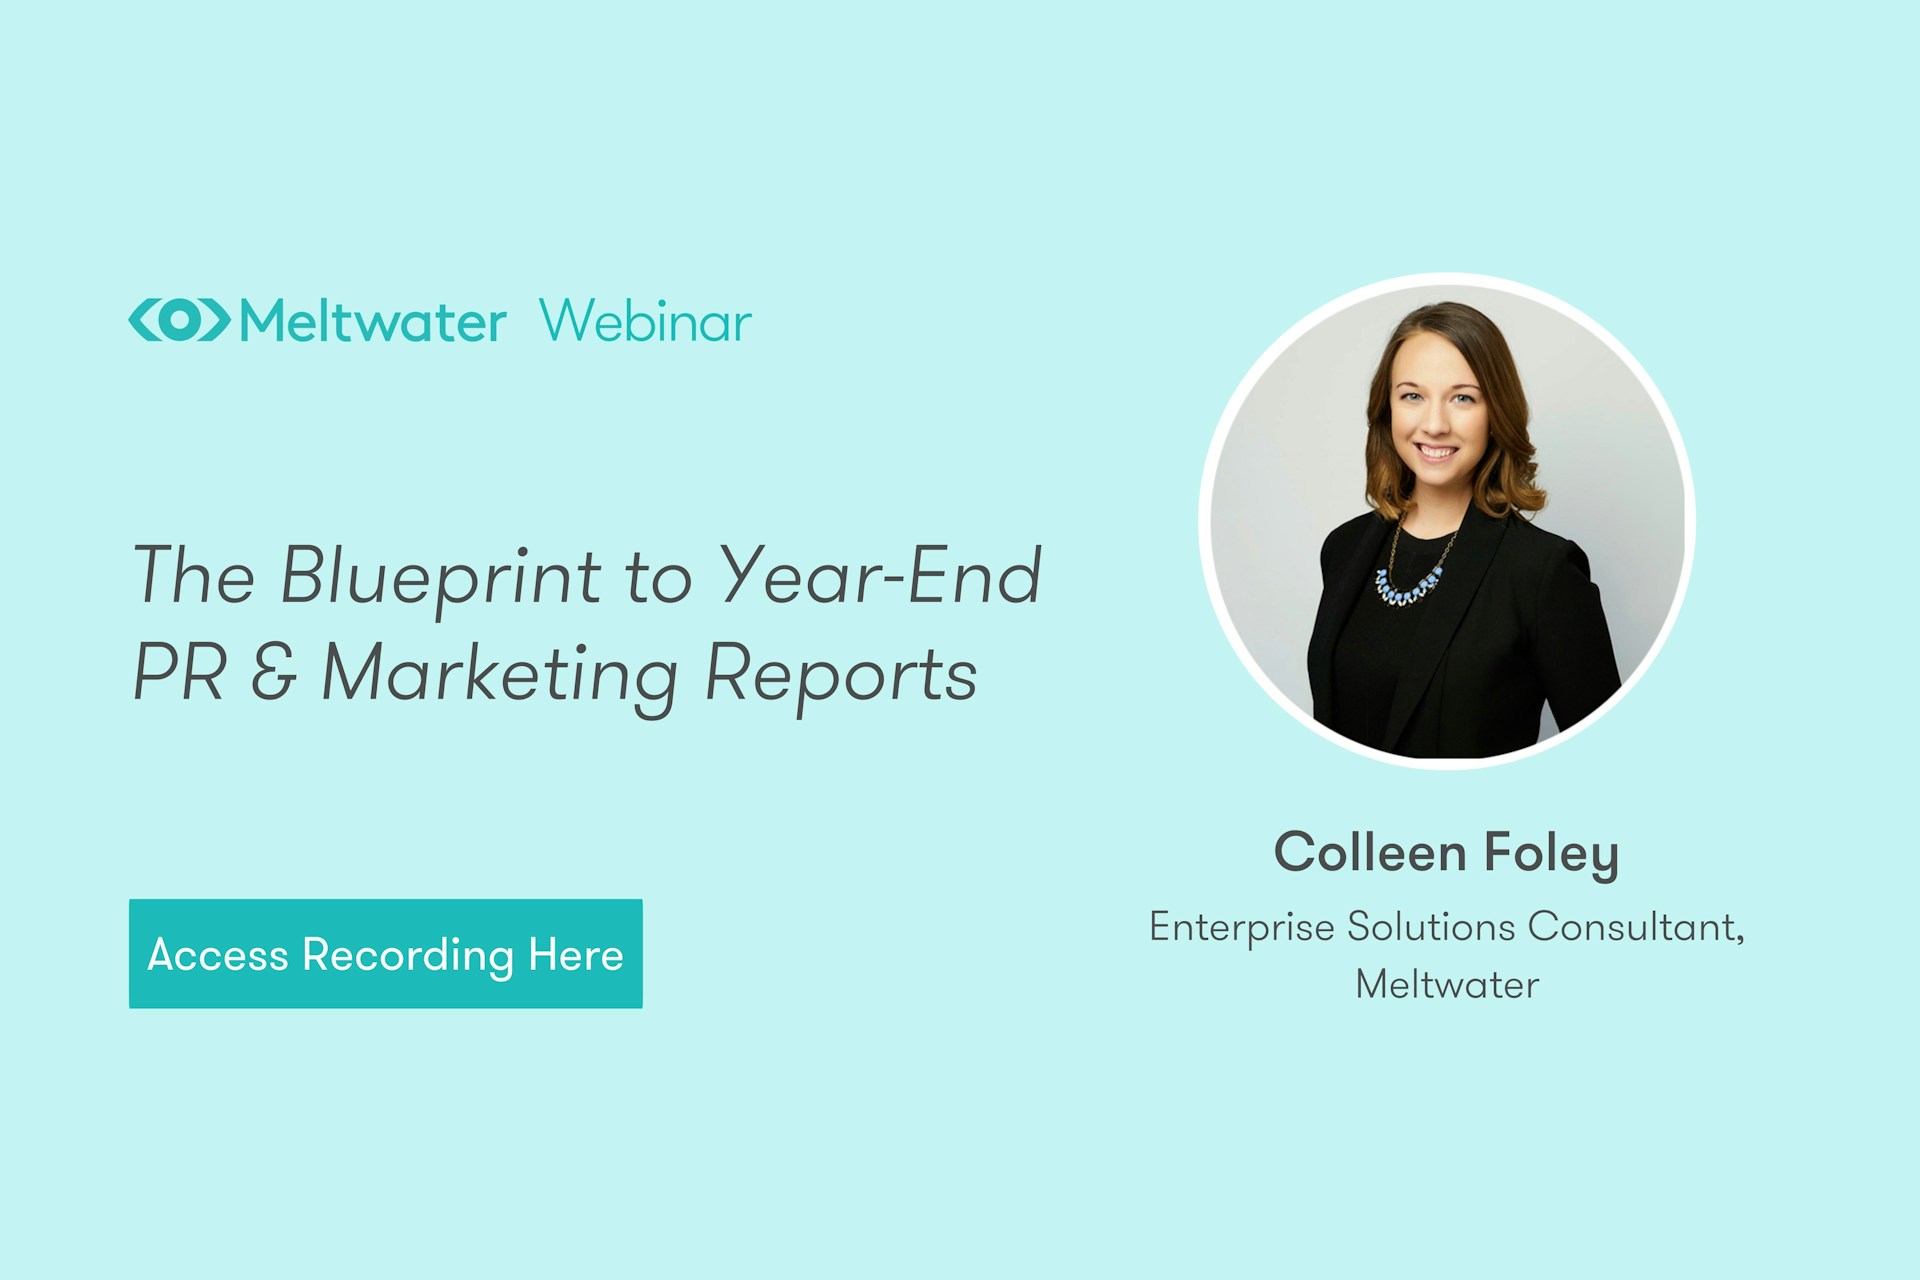 The Blueprint to Year-End PR & Marketing Reports - Meltwater On-Demand Webinar